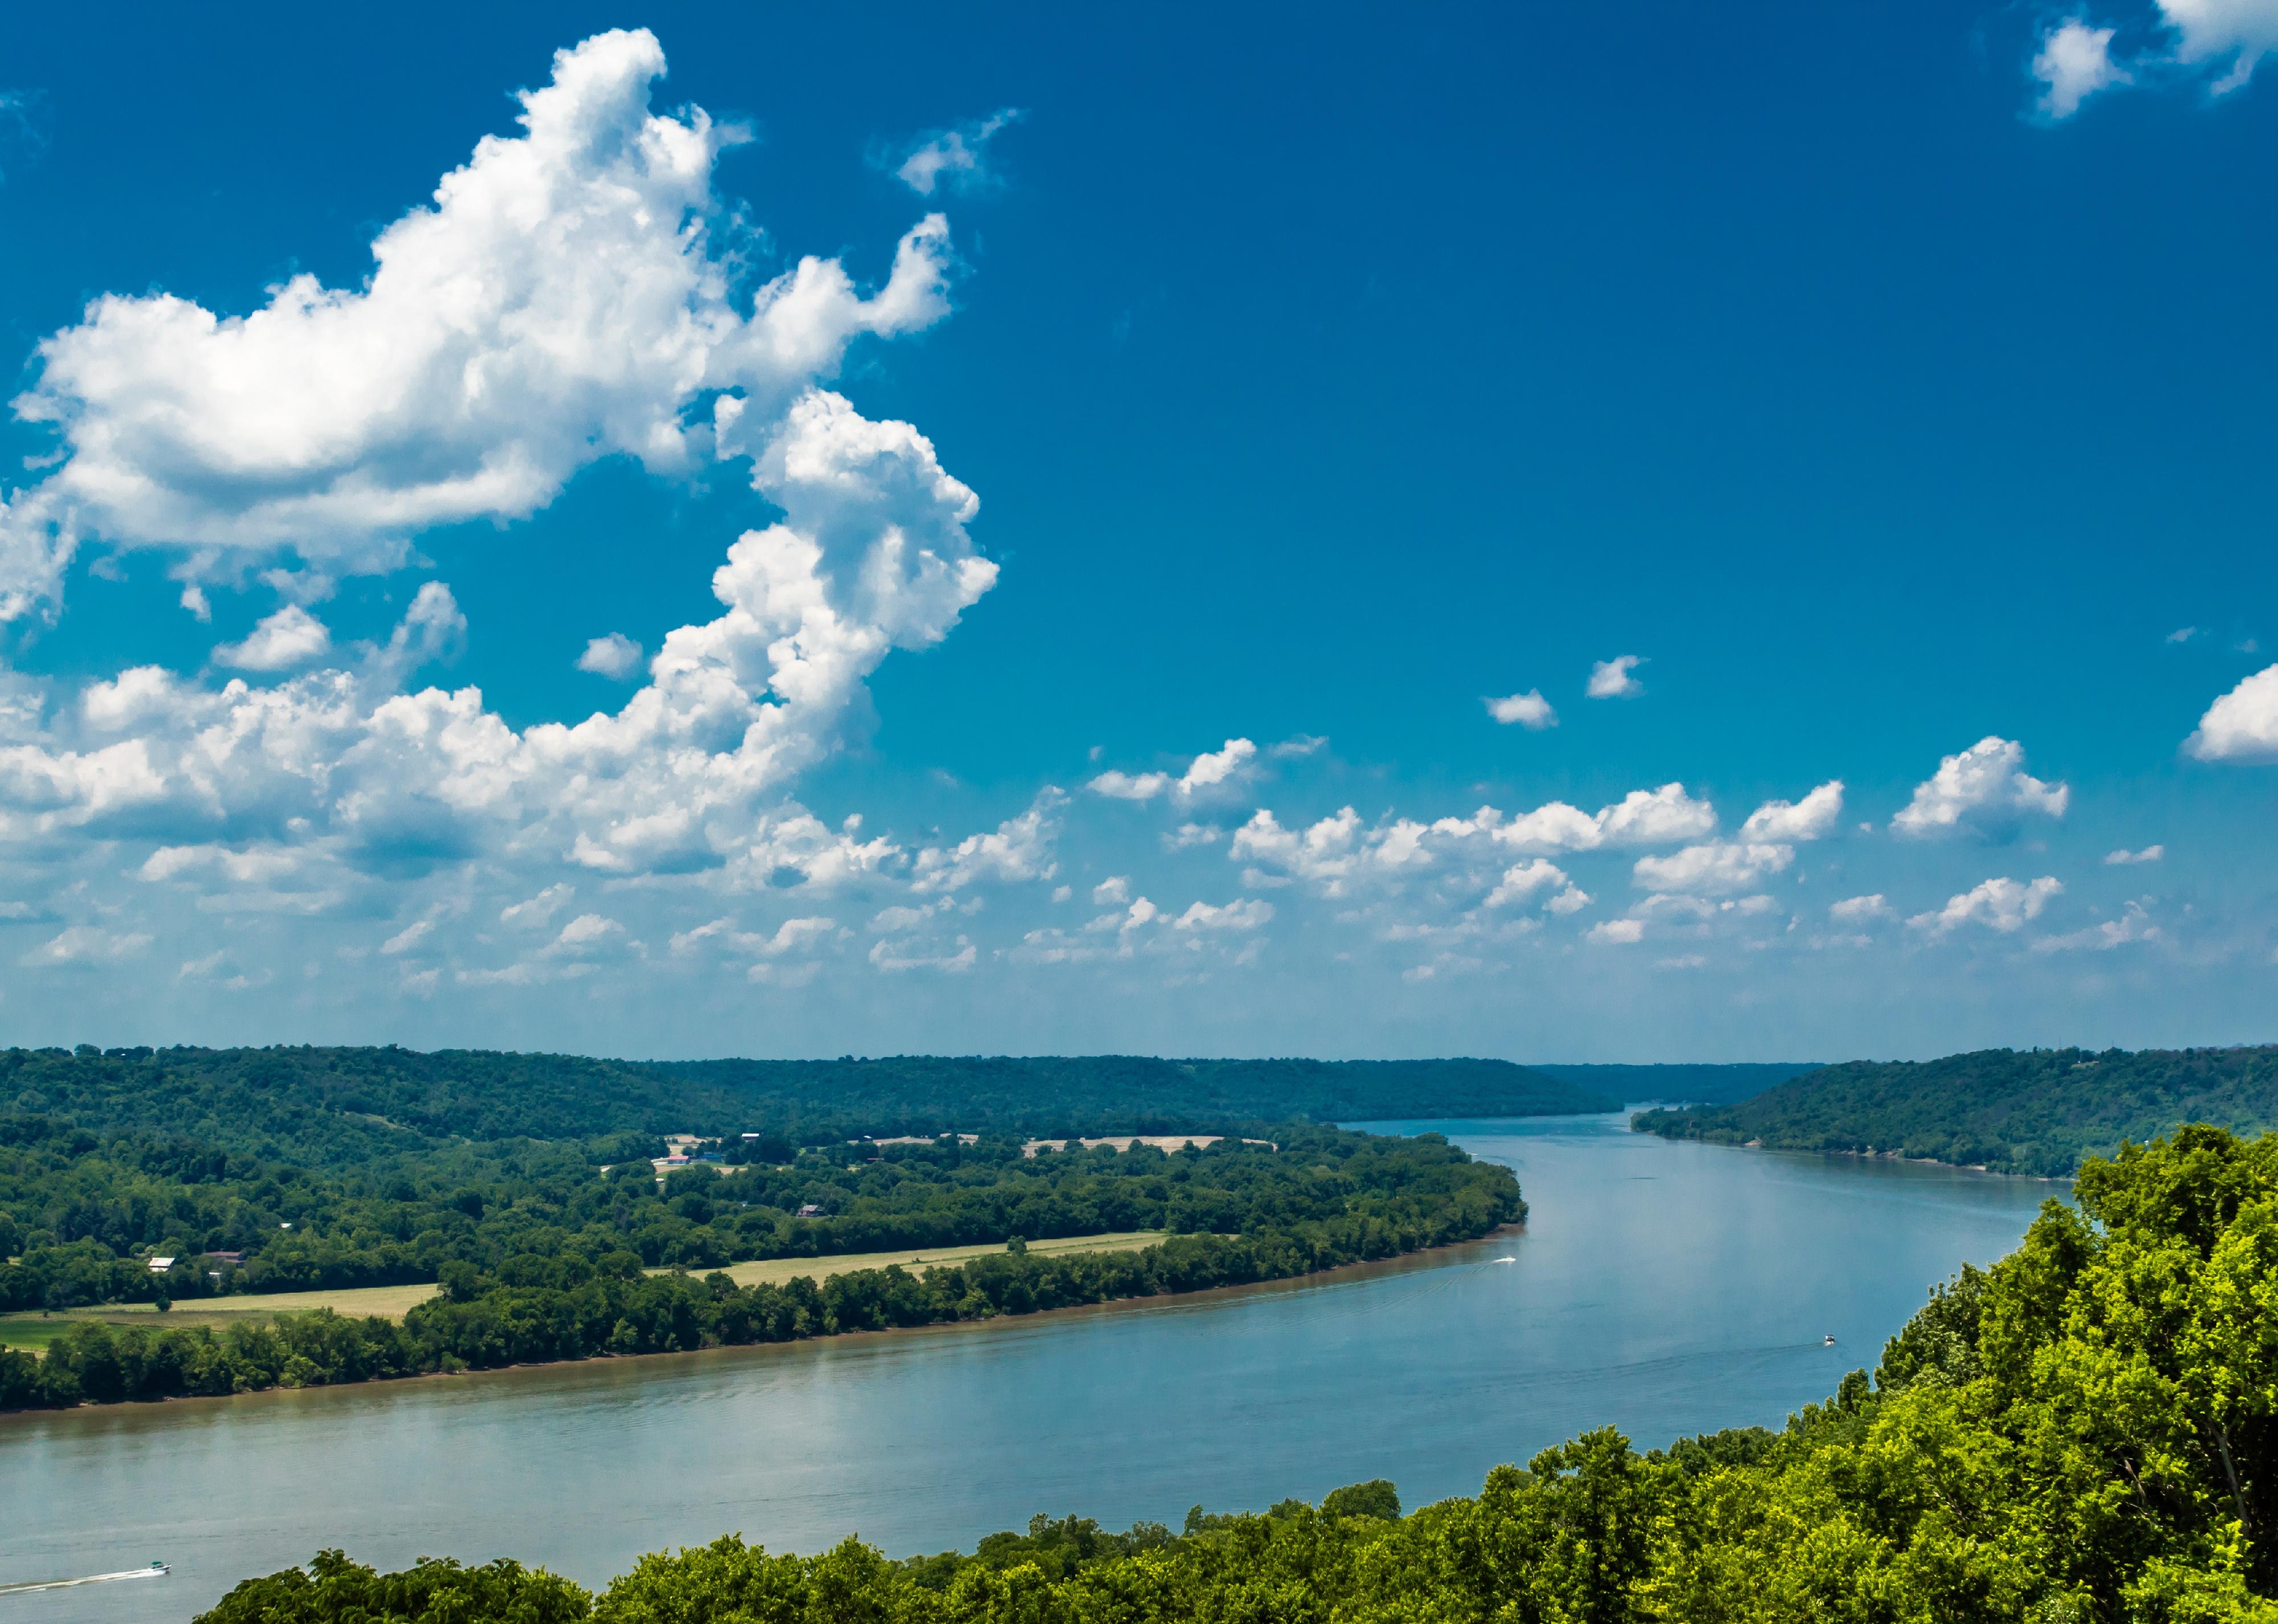 High view of a bend in Ohio River in Kentucky.